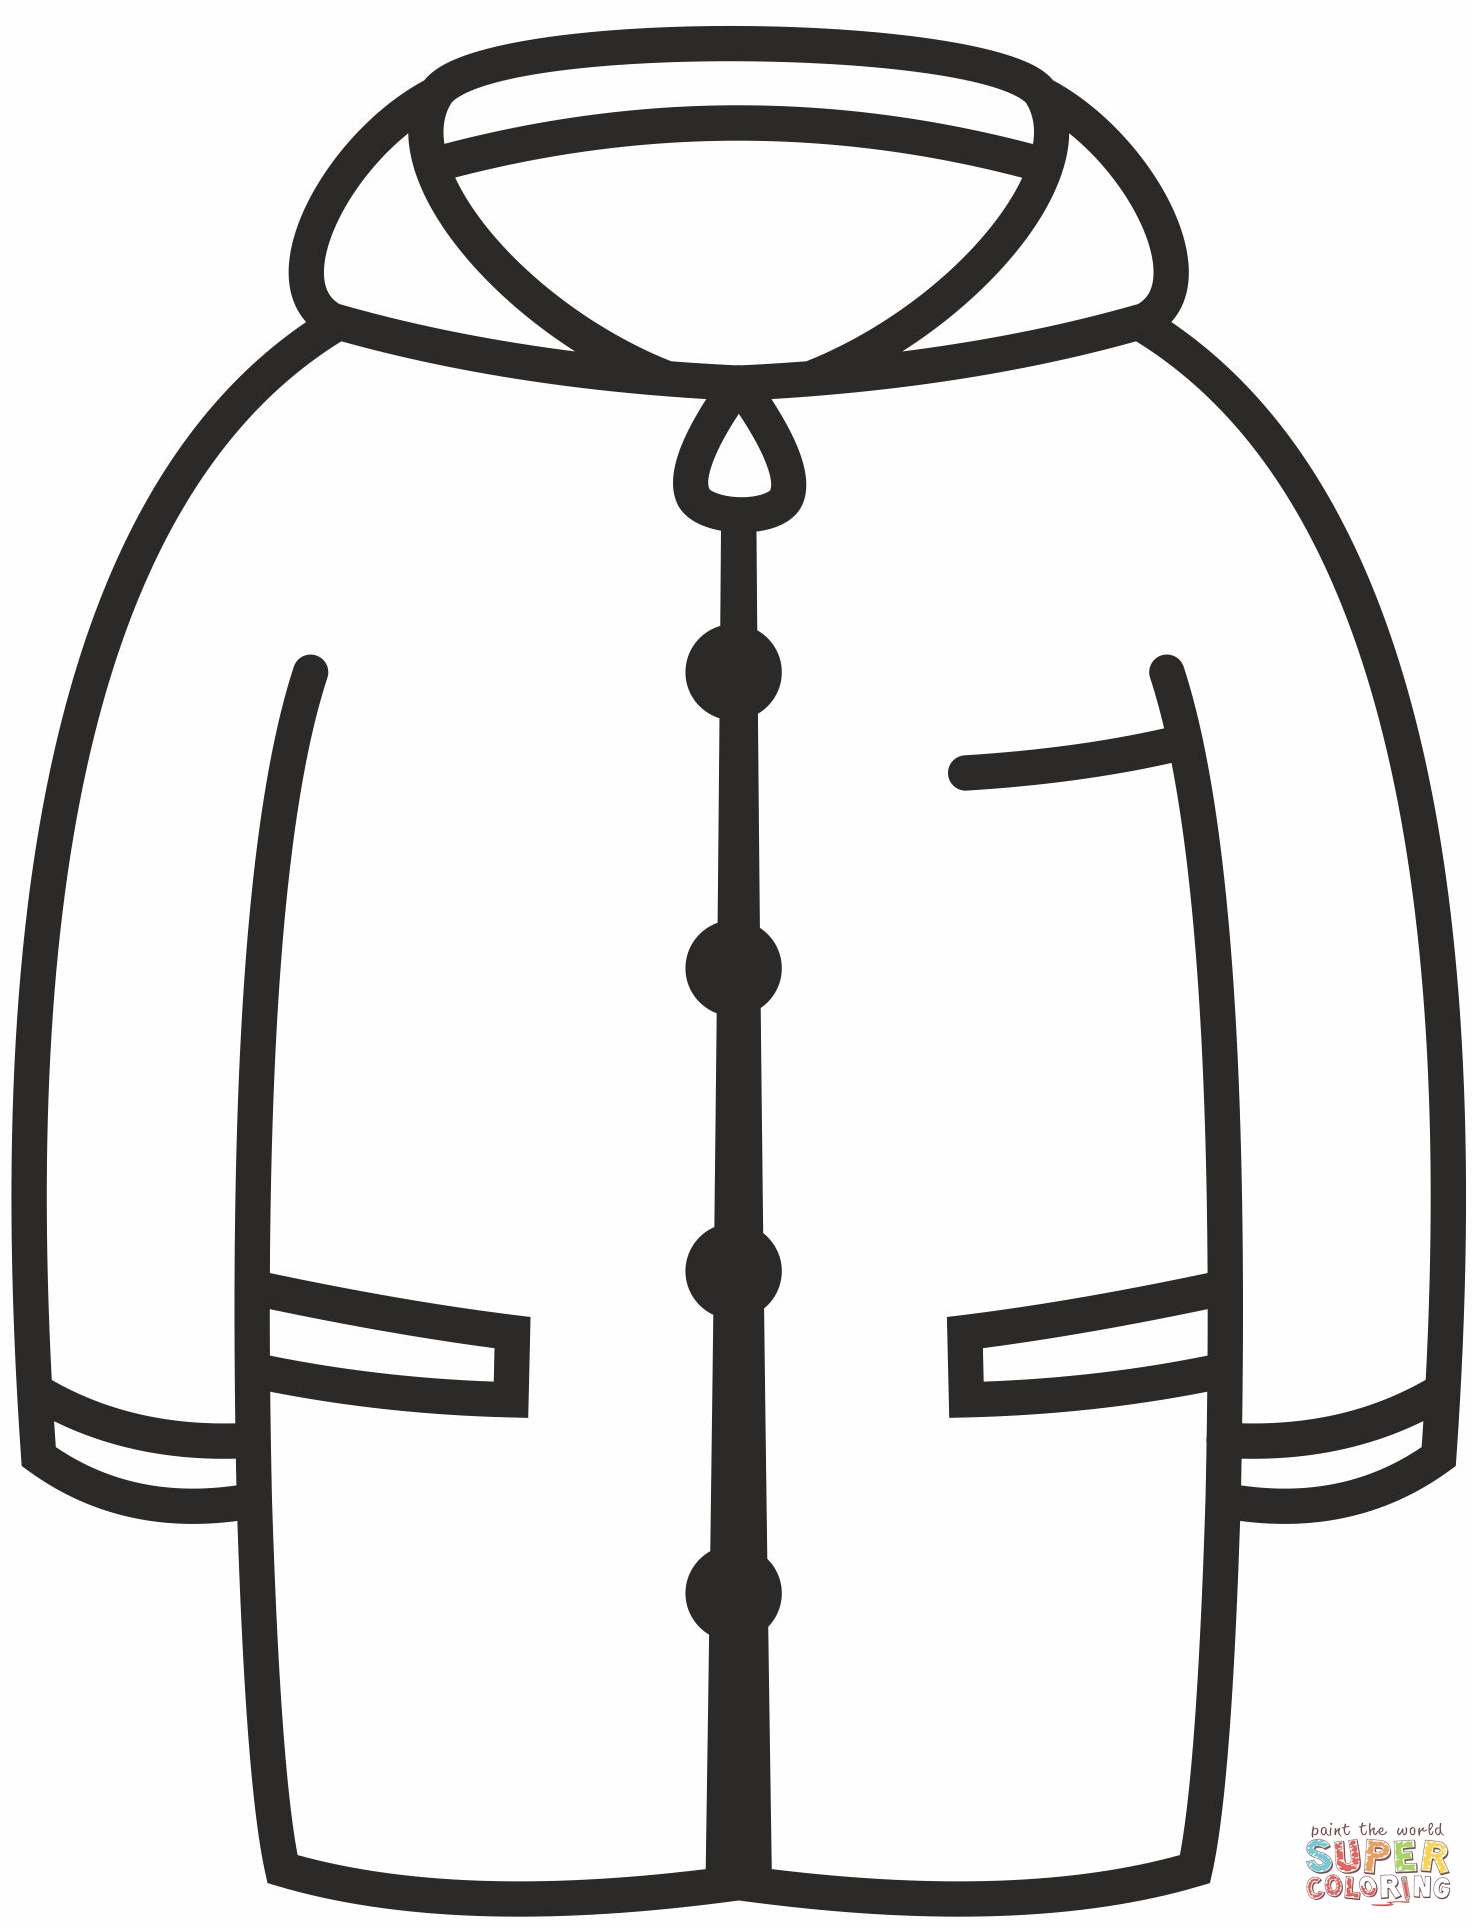 Raincoat Coloring Page. Free Printable Coloring Page - Coloring Home